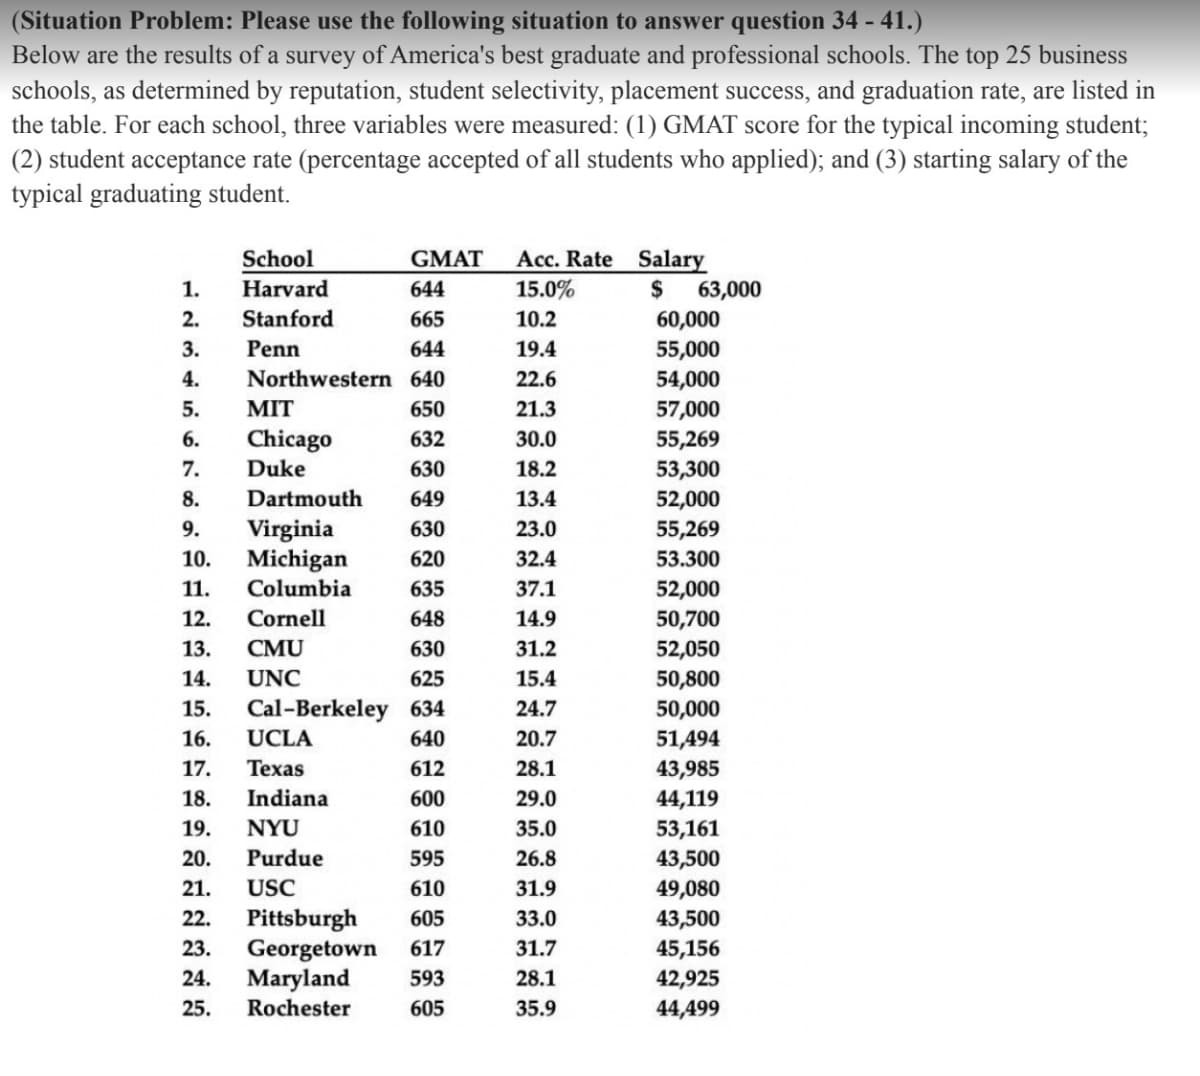 (Situation Problem: Please use the following situation to answer question 34 - 41.)
Below are the results of a survey of America's best graduate and professional schools. The top 25 business
schools, as determined by reputation, student selectivity, placement success, and graduation rate, are listed in
the table. For each school, three variables were measured: (1) GMAT score for the typical incoming student;
(2) student acceptance rate (percentage accepted of all students who applied); and (3) starting salary of the
typical graduating student.
School
GMAT
Salary
Acc. Rate
15.0%
1.
Harvard
644
$ 63,000
2.
Stanford
665
10.2
60,000
3.
Penn
644
19.4
55,000
4. Northwestern
640
22.6
54,000
5.
MIT
650
21.3
57,000
6.
Chicago
632
30.0
55,269
7.
Duke
630
18.2
53,300
8.
Dartmouth
649
13.4
52,000
9.
Virginia
630
23.0
55,269
10. Michigan 620
32.4
53.300
11. Columbia
635
37.1
52,000
12. Cornell
648
14.9
50,700
13. CMU
630
31.2
52,050
14. UNC
625
15.4
50,800
15. Cal-Berkeley 634
24.7
50,000
16. UCLA
640
20.7
51,494
17. Texas
612
28.1
43,985
Indiana
600
29.0
44,119
18.
19. NYU
610
35.0
53,161
20.
Purdue
595
26.8
43,500
21.
USC
610
31.9
49,080
22.
Pittsburgh 605
33.0
43,500
23.
Georgetown 617
31.7
45,156
24.
Maryland
593
28.1
42,925
25. Rochester
605
35.9
44,499